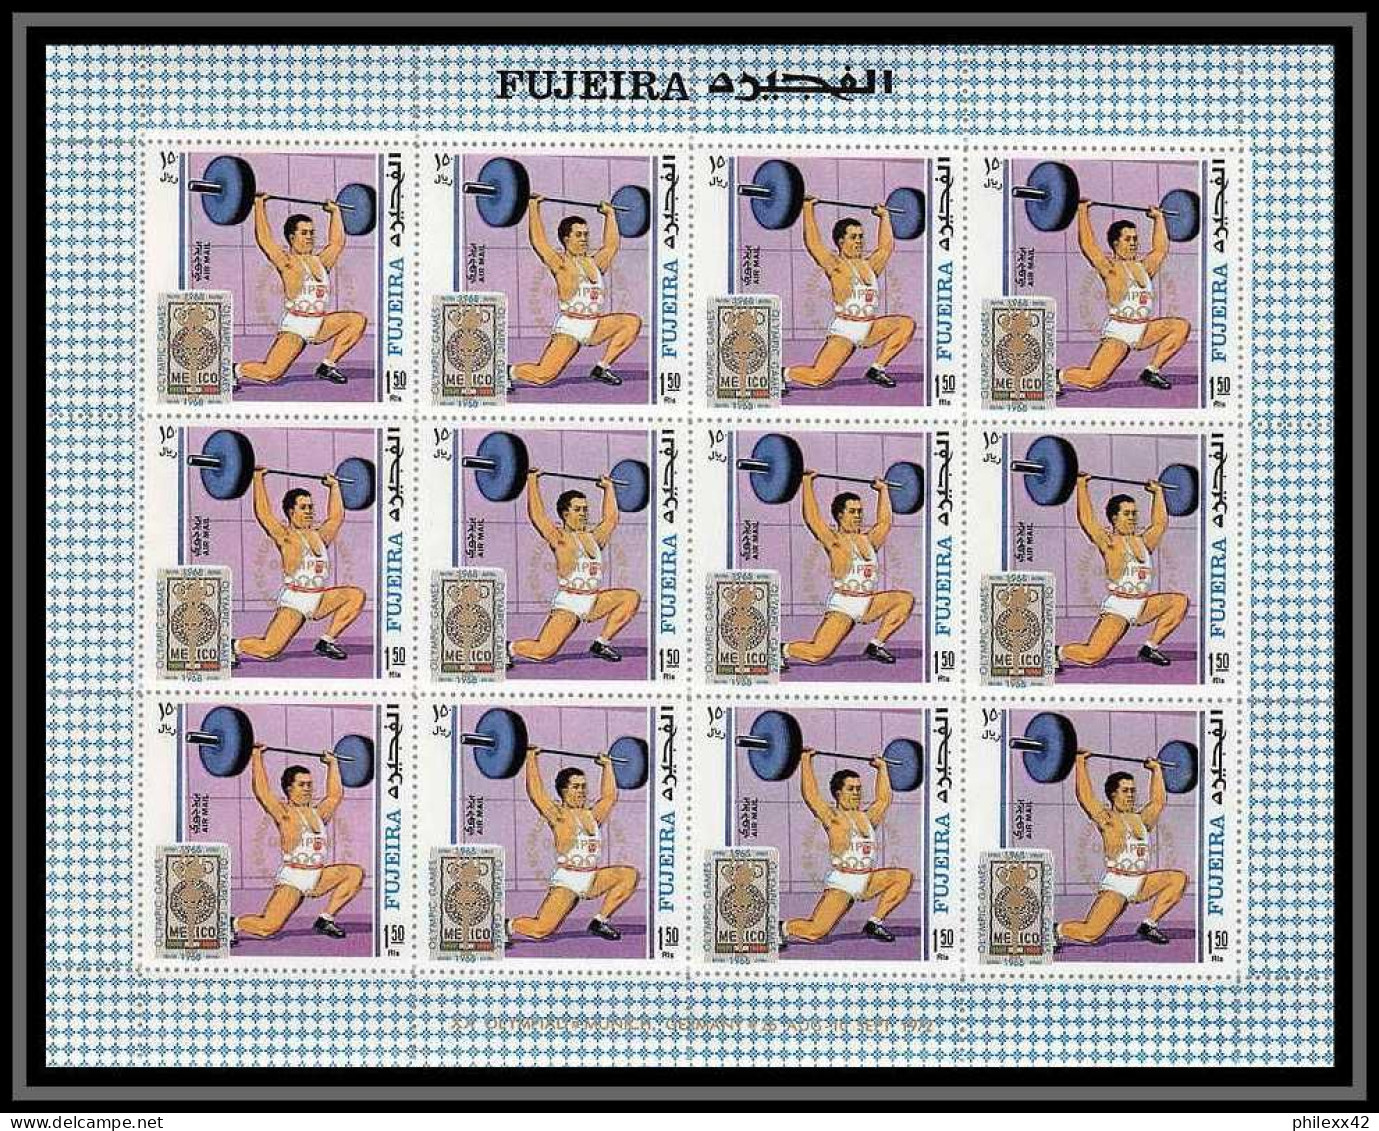 183a Fujeira MNH ** N° 320 / 329 A Overprint Gold Jeux Olympiques (olympic Games) Mexico 68 Cycling Feuilles (sheets) - Estate 1968: Messico